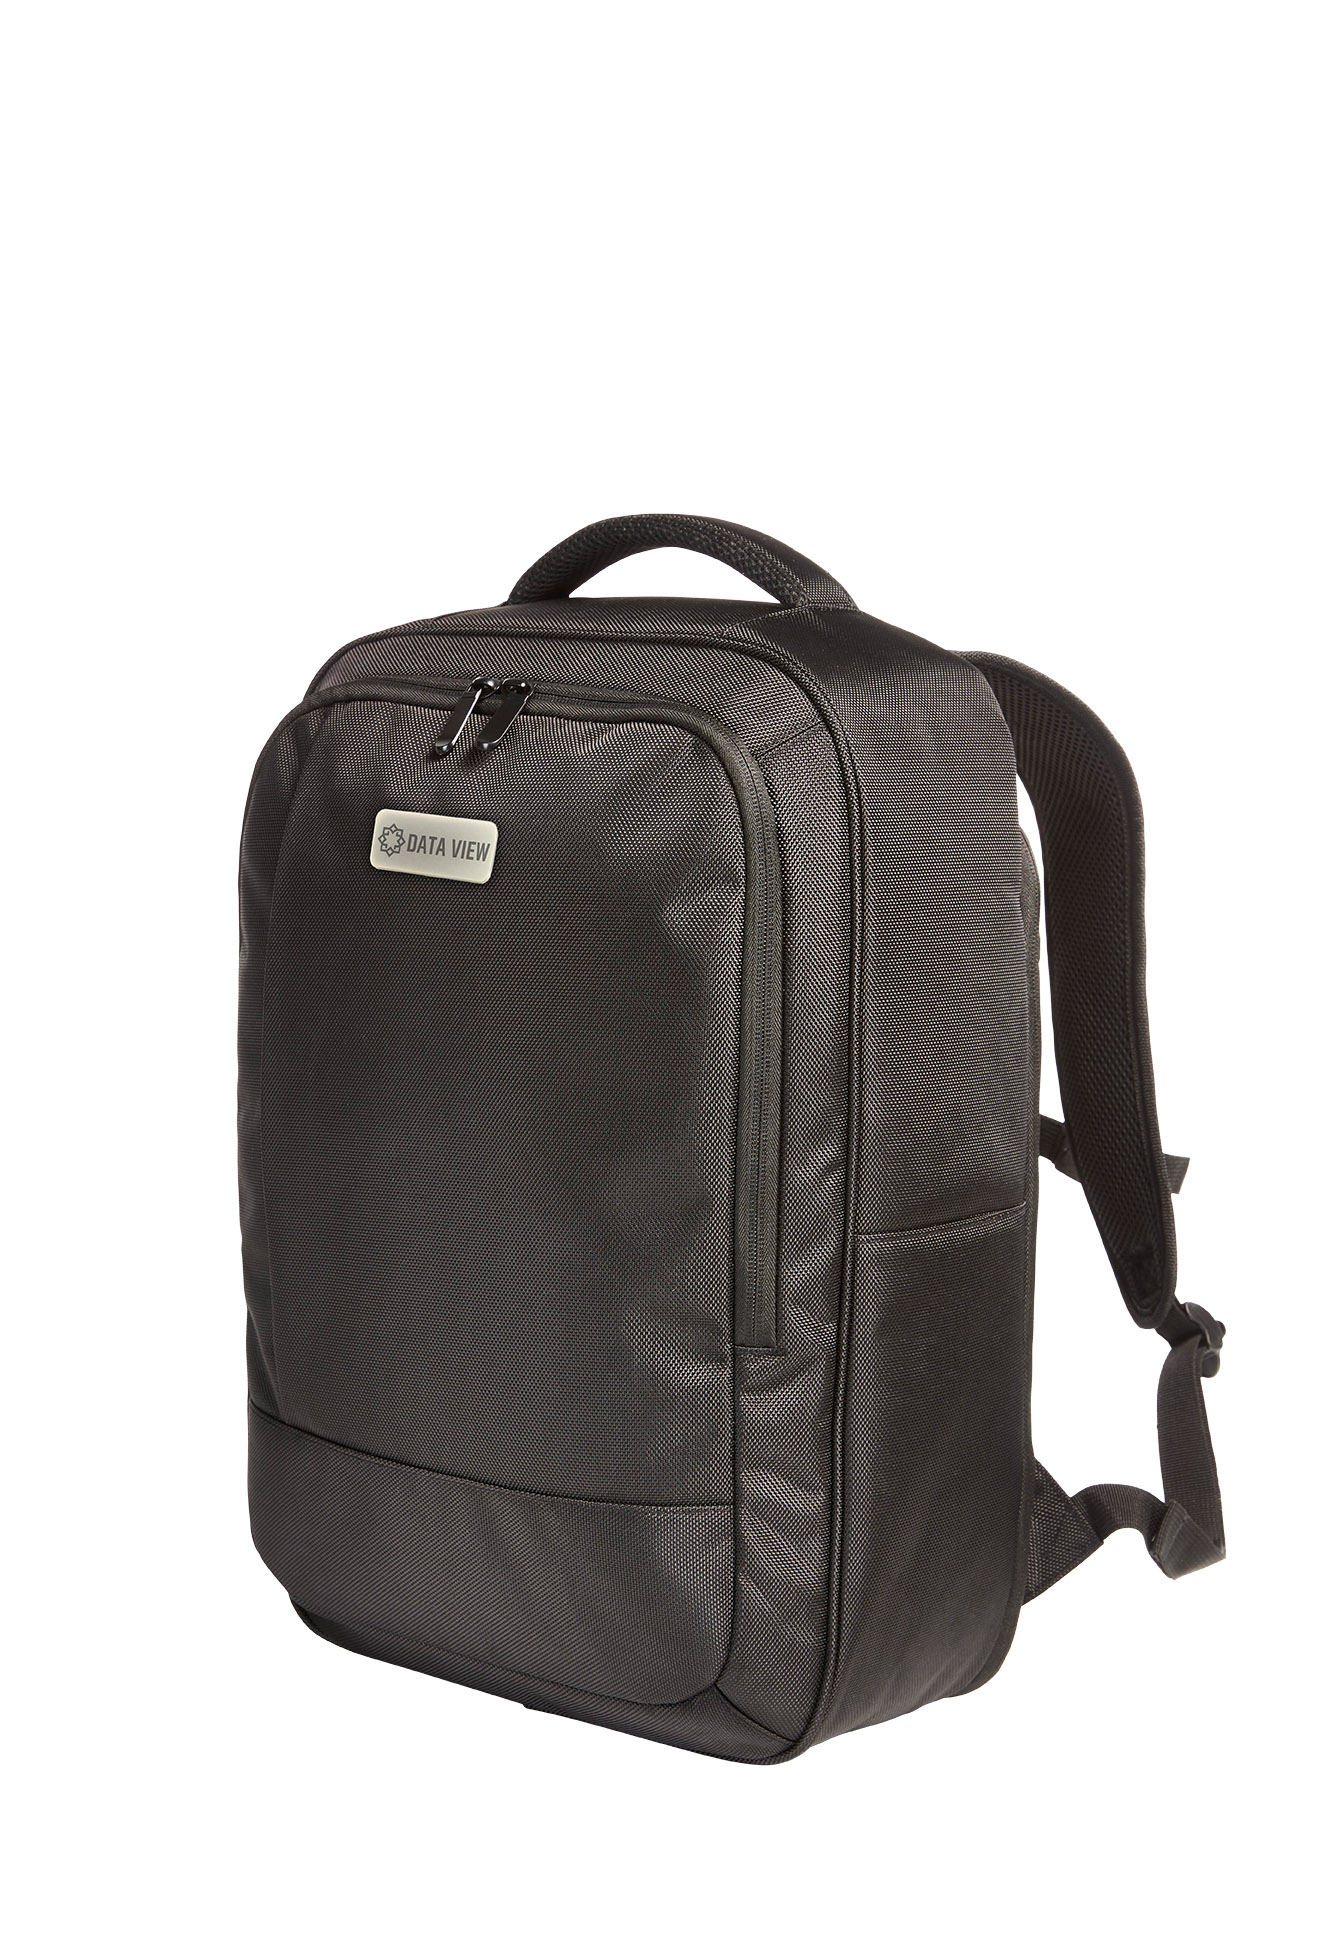 business notebook backpack GIANT